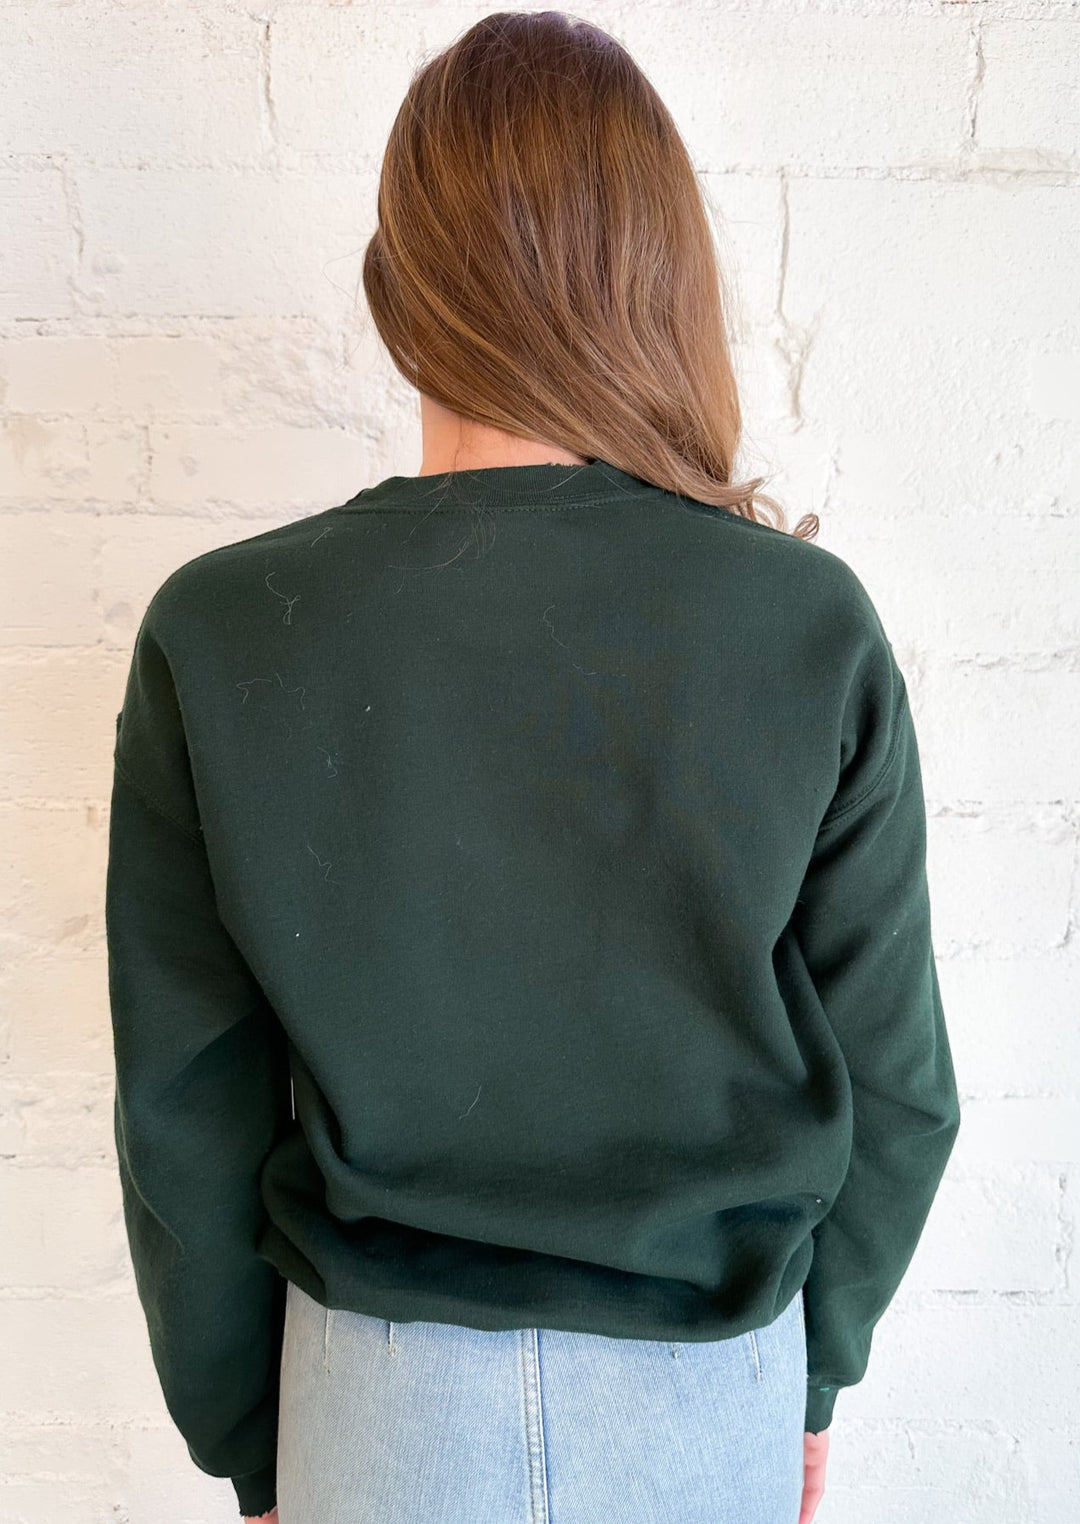 Christmas Patch Military Green Thrifted Sweatshirt, Tops, Adeline, Adeline, dallas boutique, dallas texas, texas boutique, women's boutique dallas, adeline boutique, dallas boutique, trendy boutique, affordable boutique